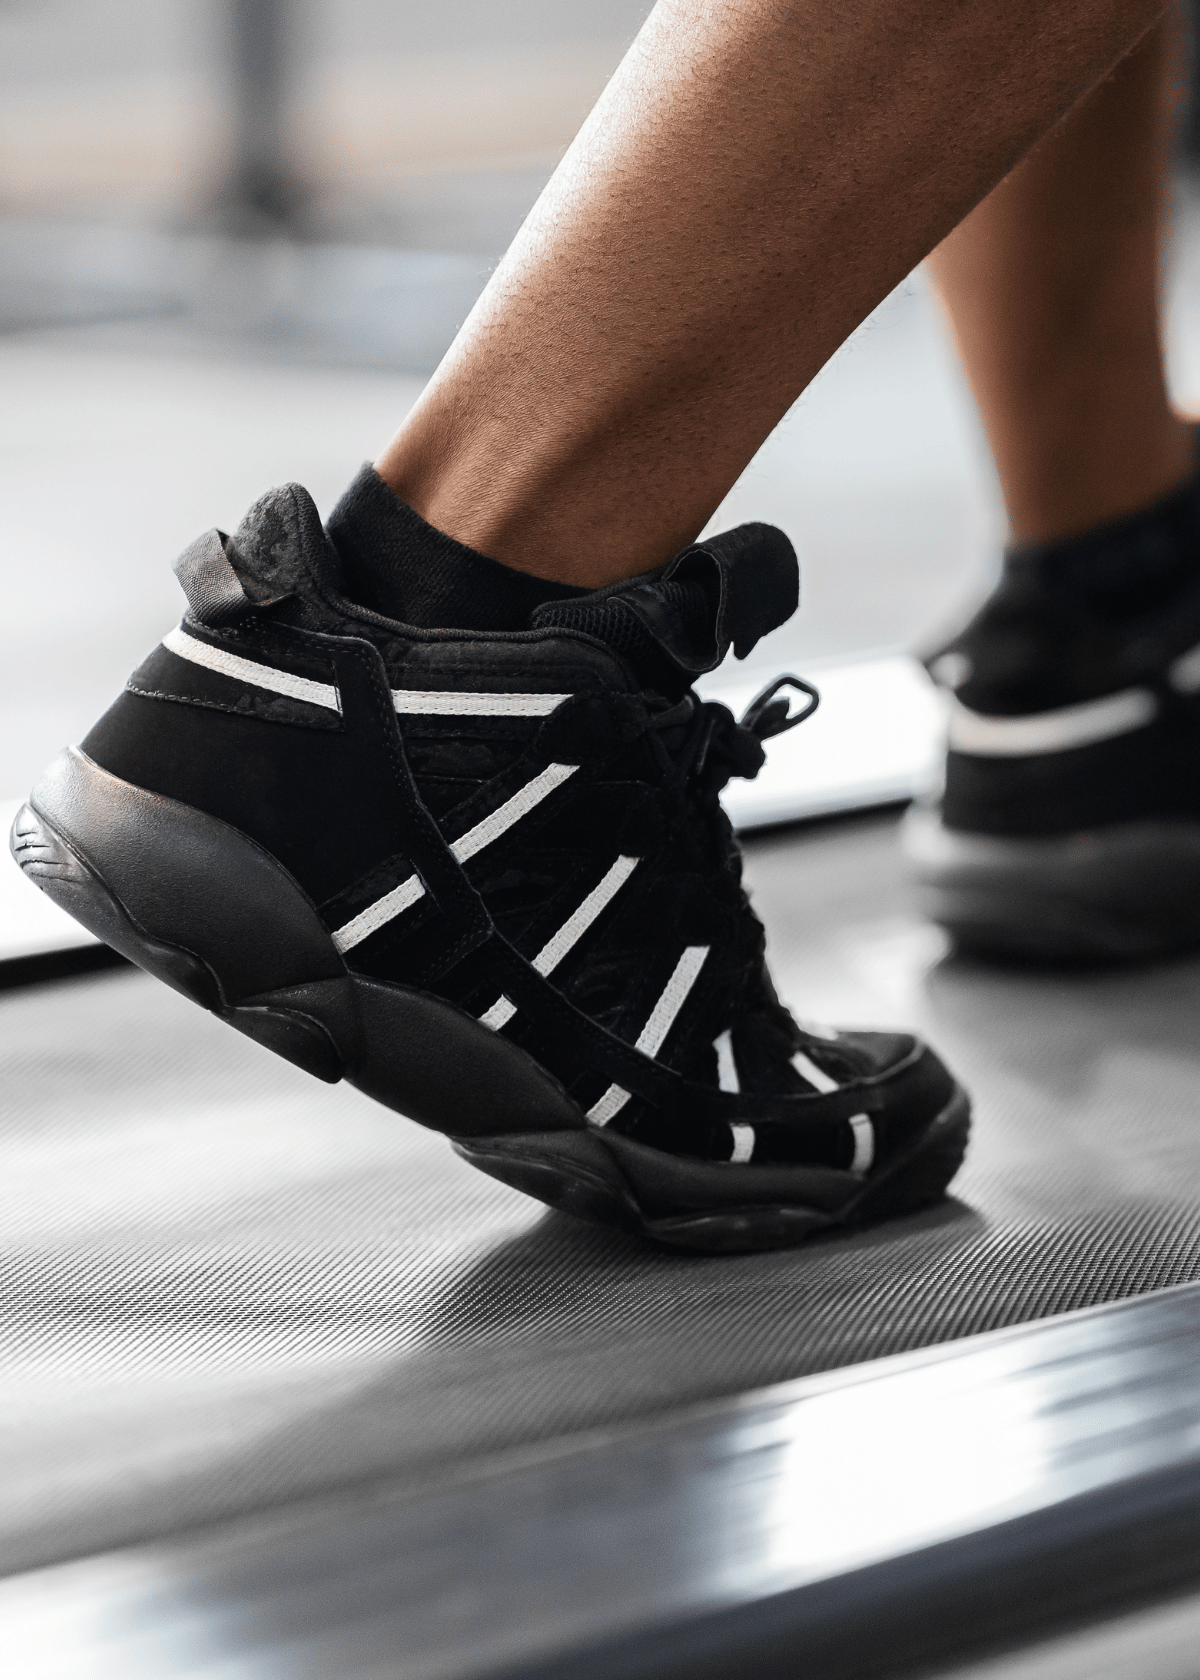 Stride in Style: The Best Shoes for Treadmill Walking and All-Day Comfort